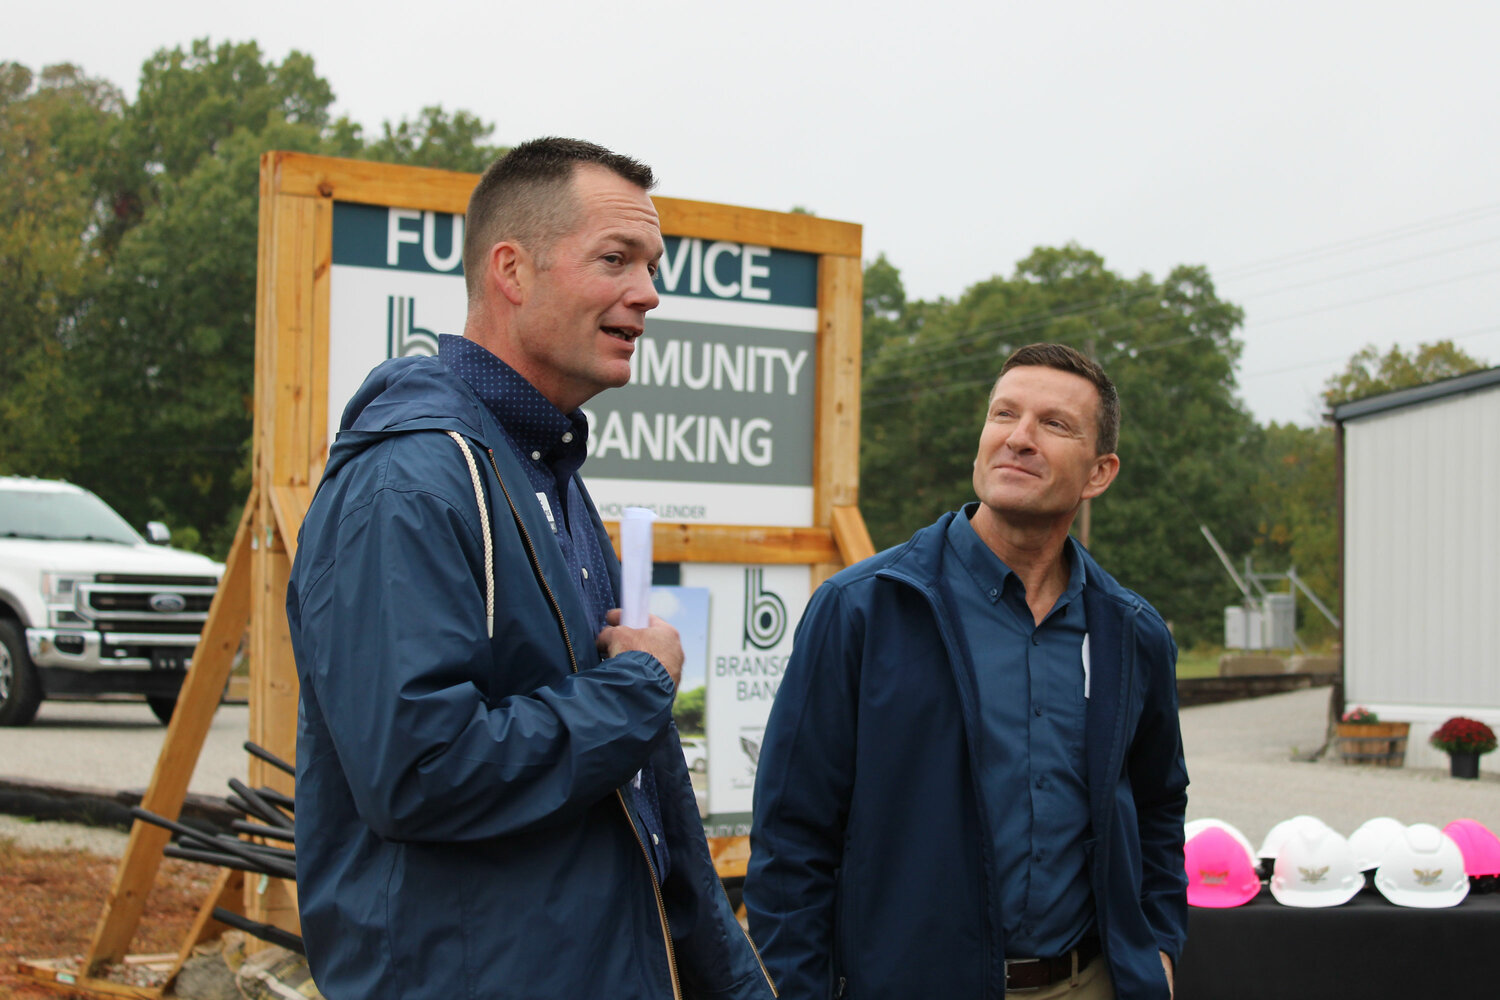 Bank officers Eric Simkins, left, and Bill Jones address the crowd in Branson West.